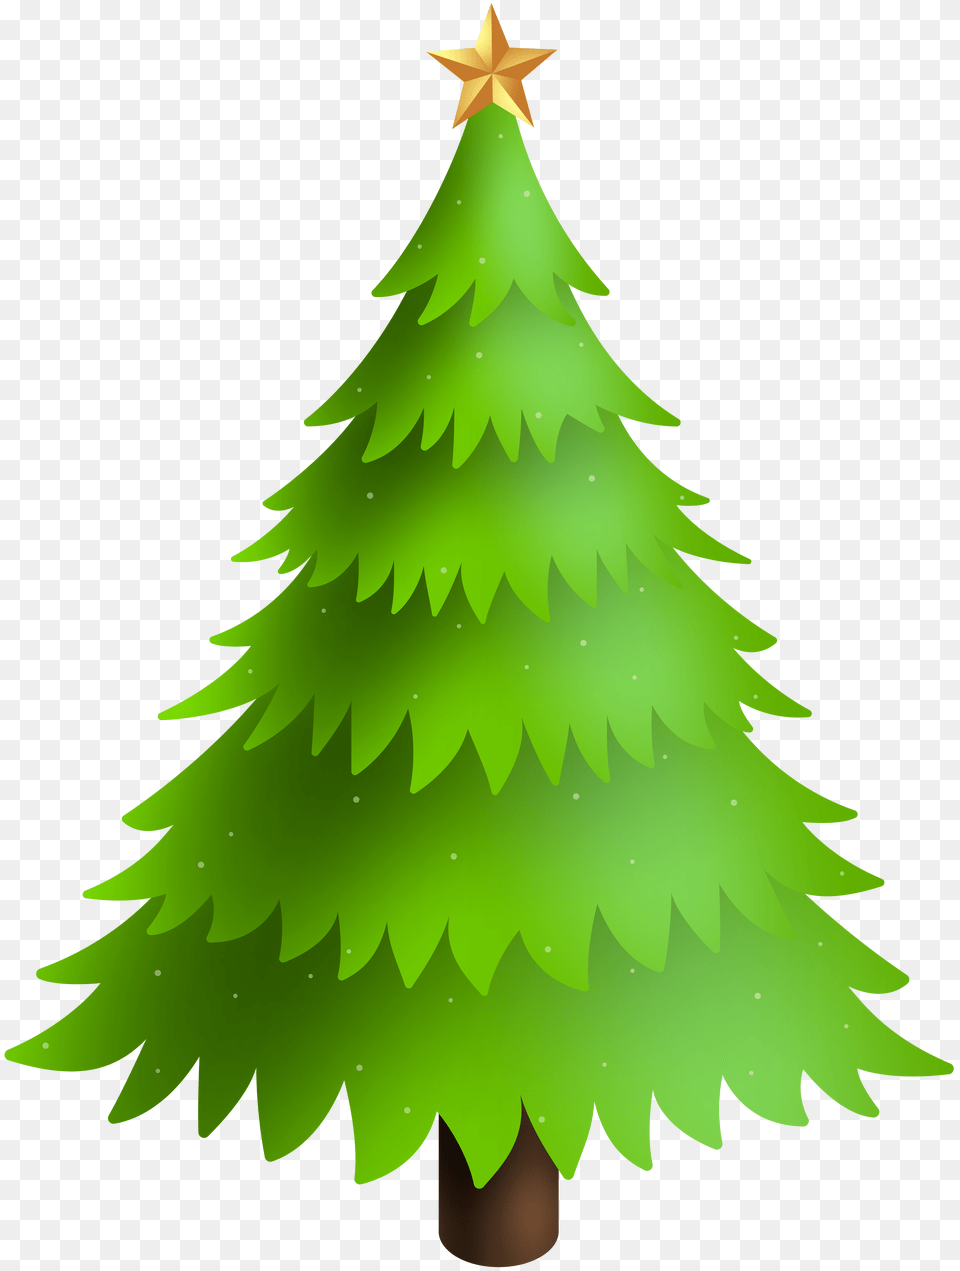 Christmas Pine Tree Clip Art, Green, Plant, Christmas Decorations, Festival Png